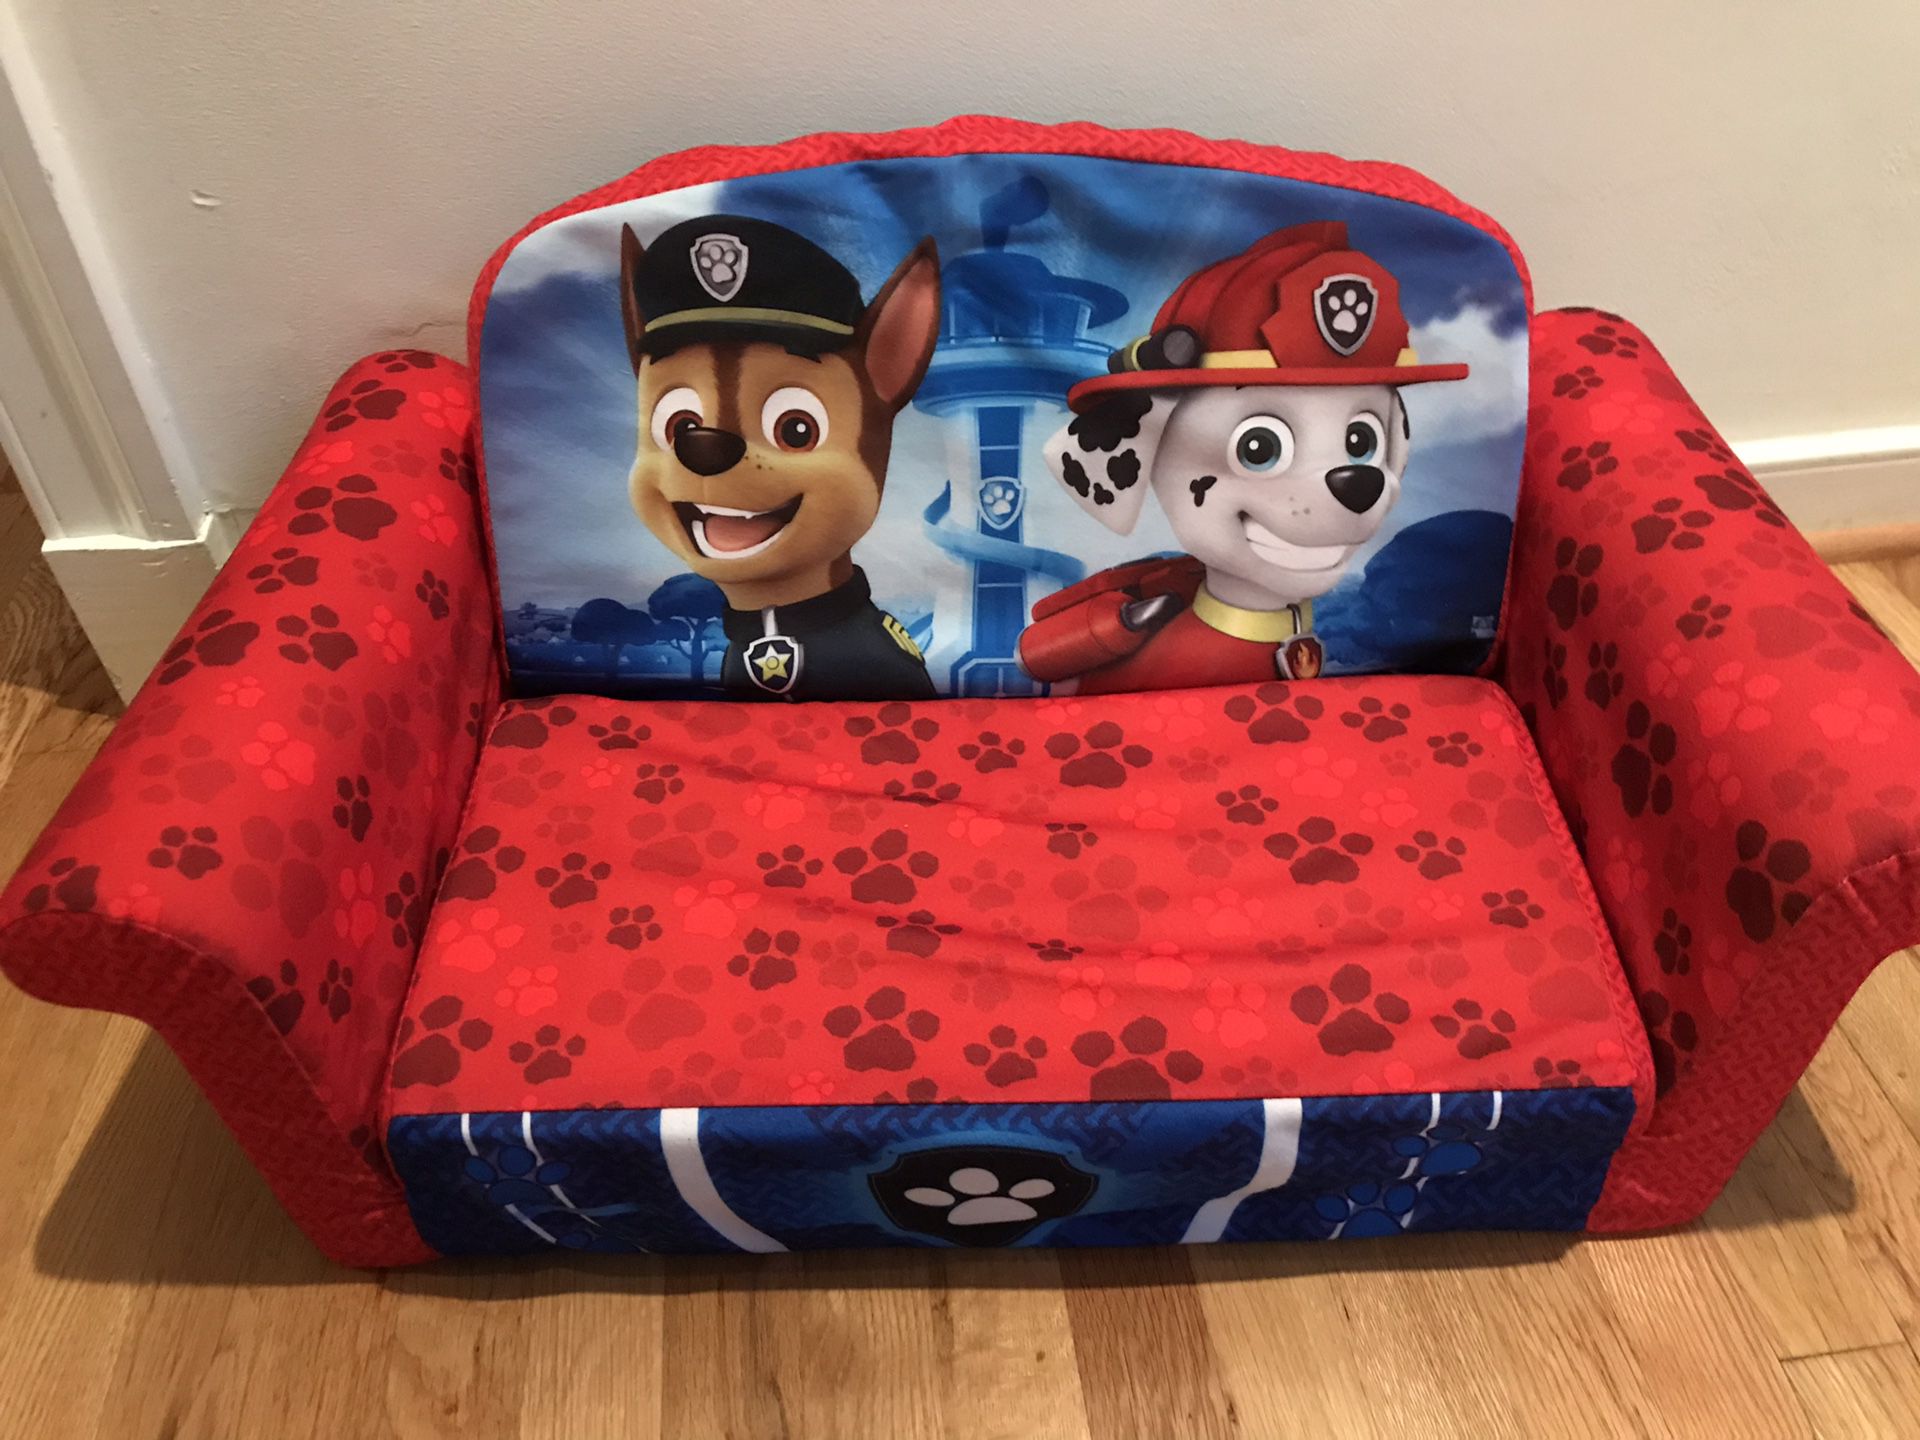 Paw Patrol chair/pull out